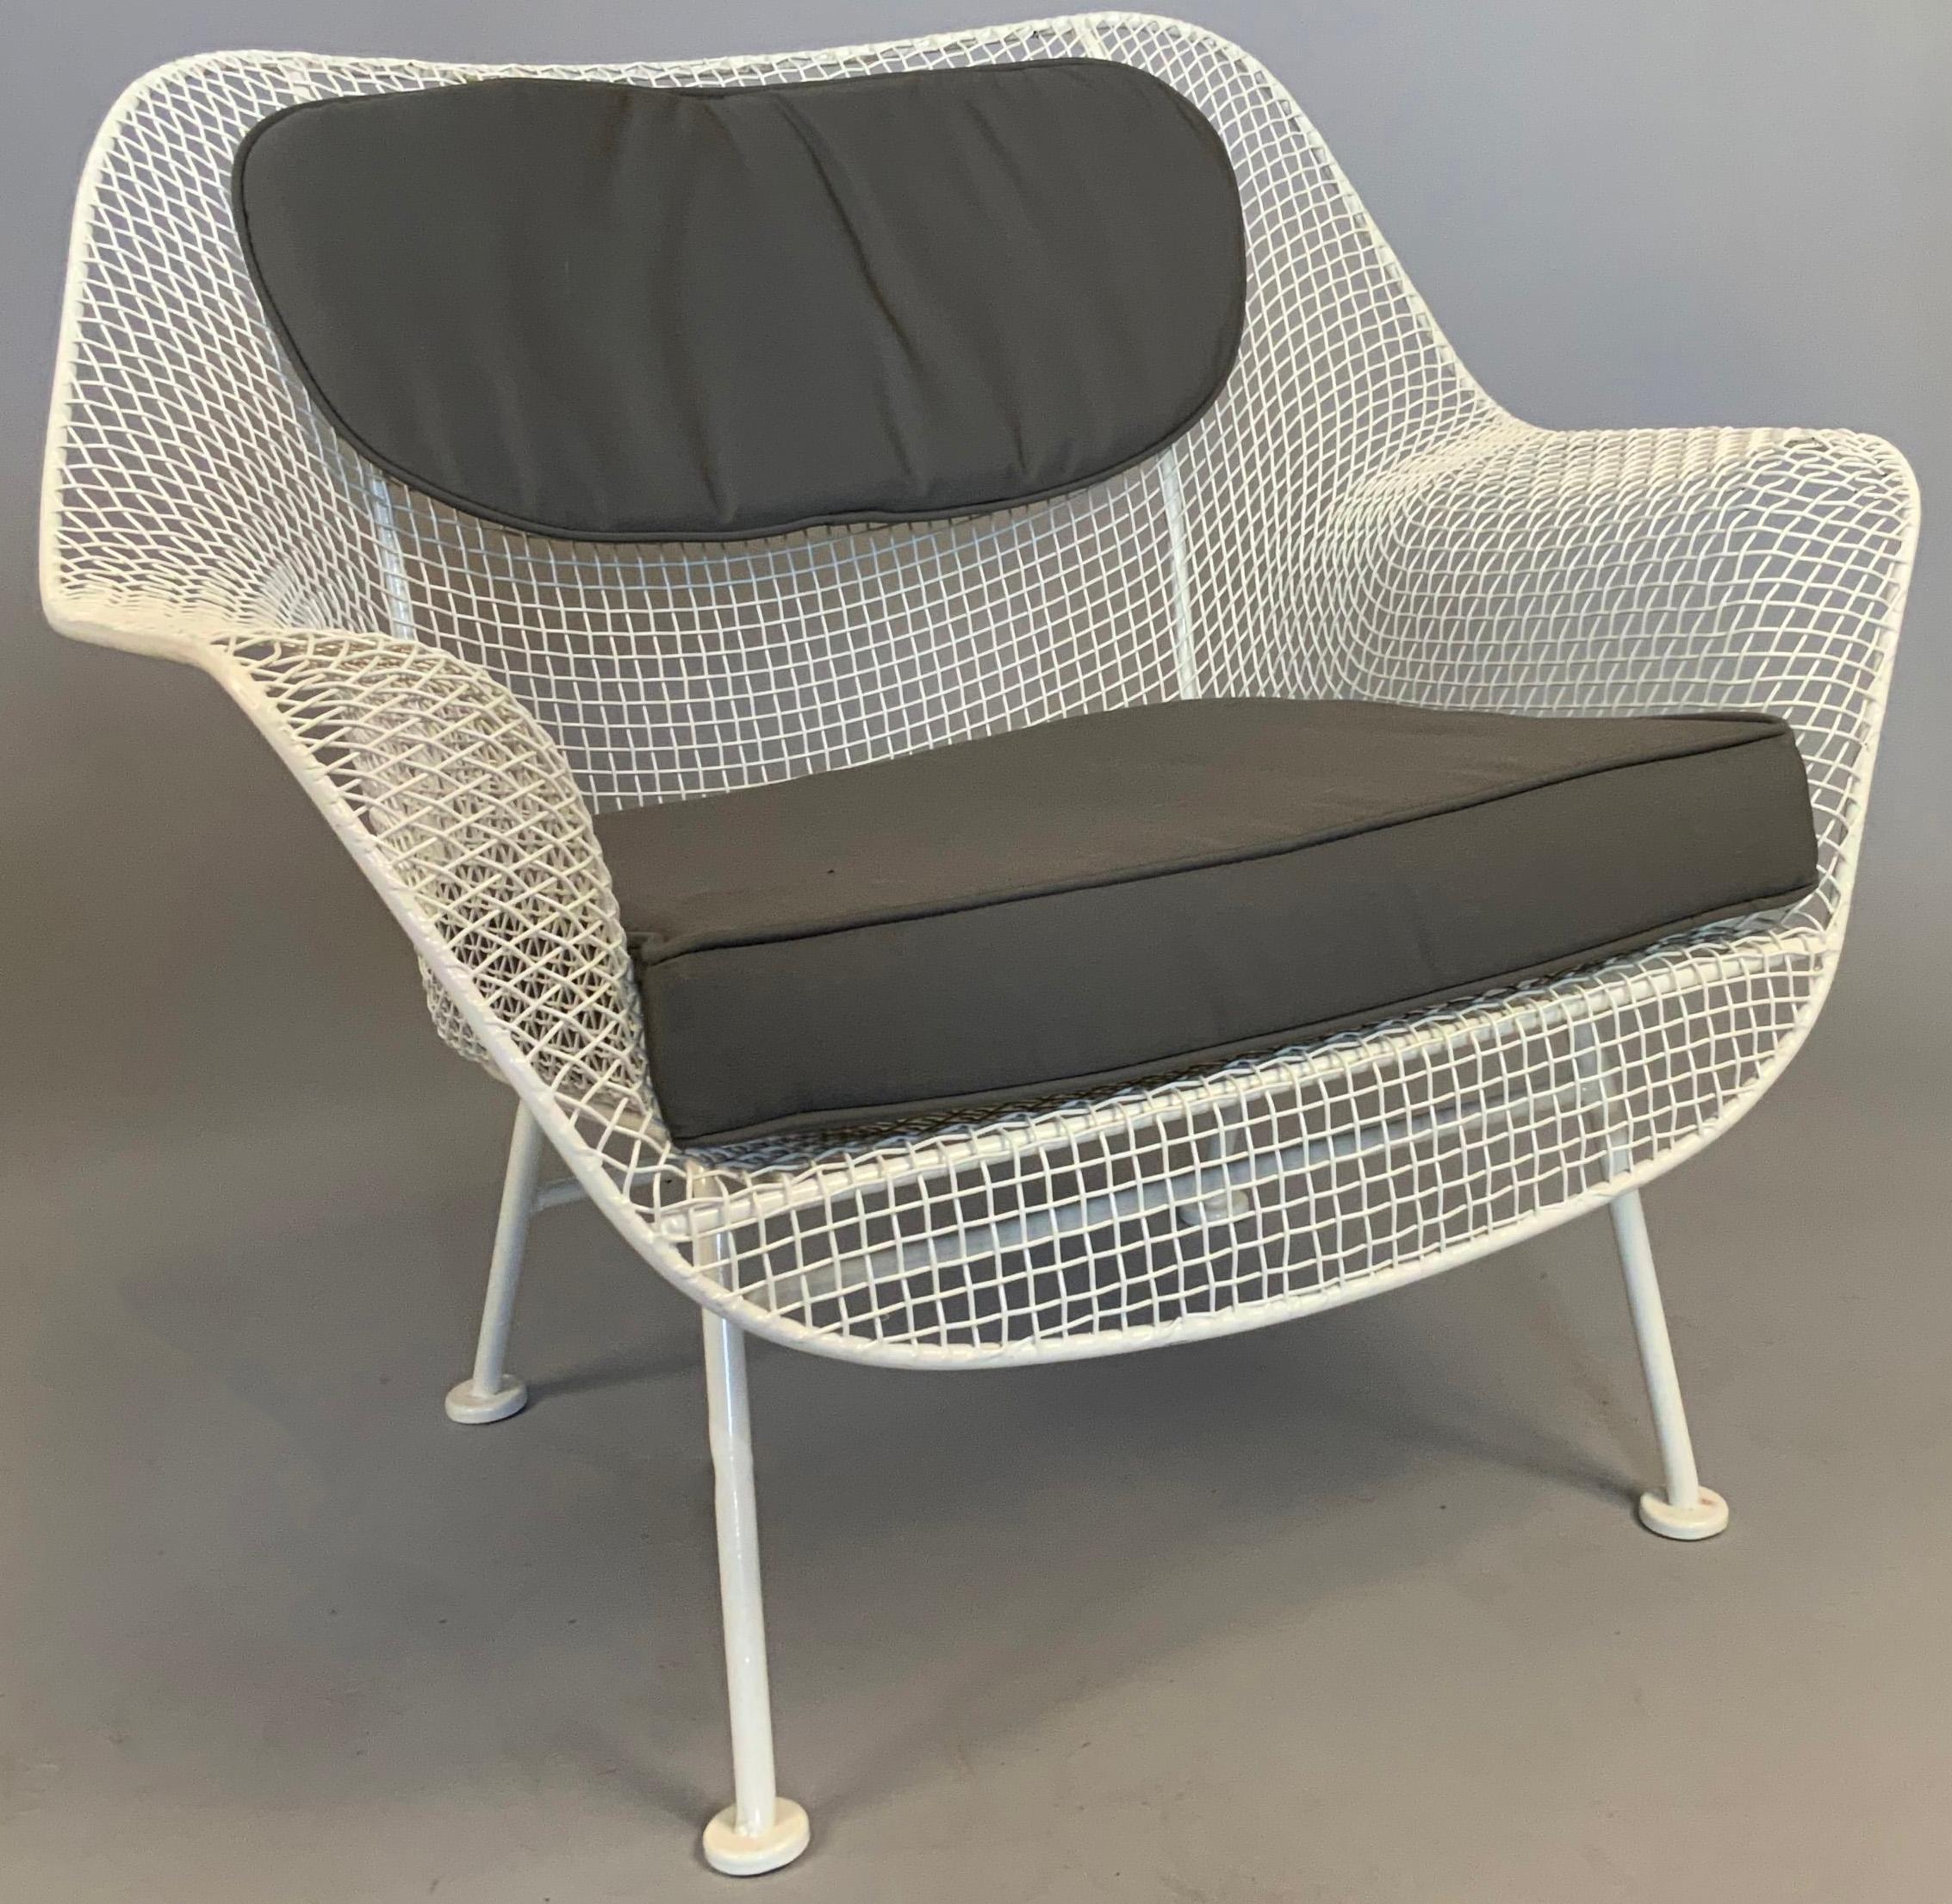 A pair of 1950s 'Sculptura' wrought iron lounge chairs designed by Russell Woodard. 

Woodard's Sculptura collection was made with wrought iron frames and woven steel mesh seats. These are the largest and most comfortable lounge chairs made by